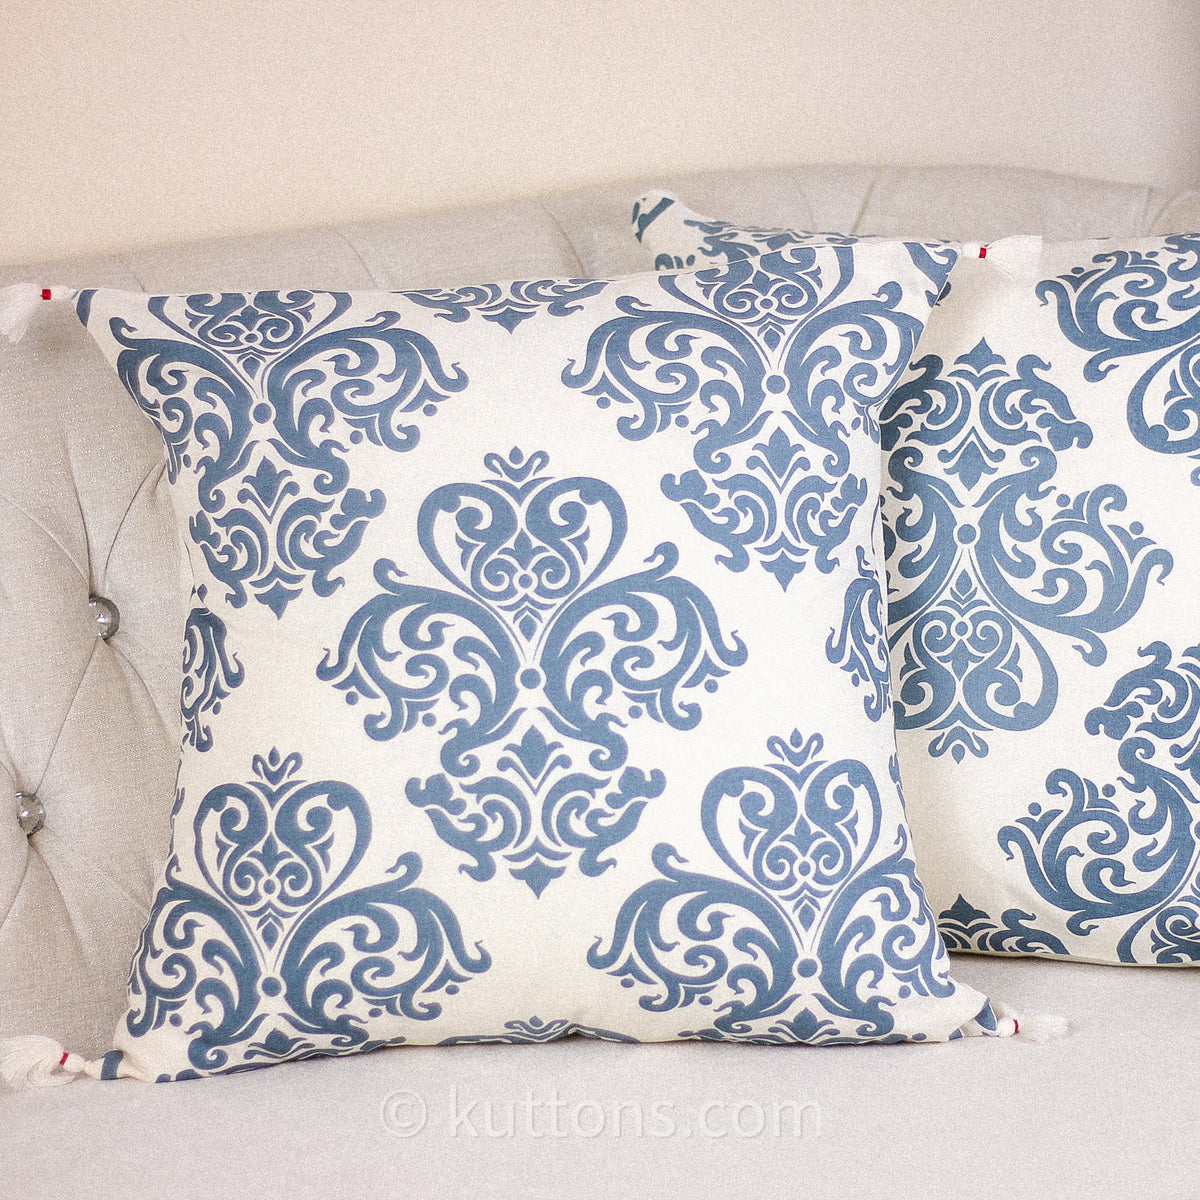 100% Cotton Throw Pillow Cover Hand Screen Printed with Damask Motif - Corner Tassels | Cream-Blue, (Set of 2), 20x20"